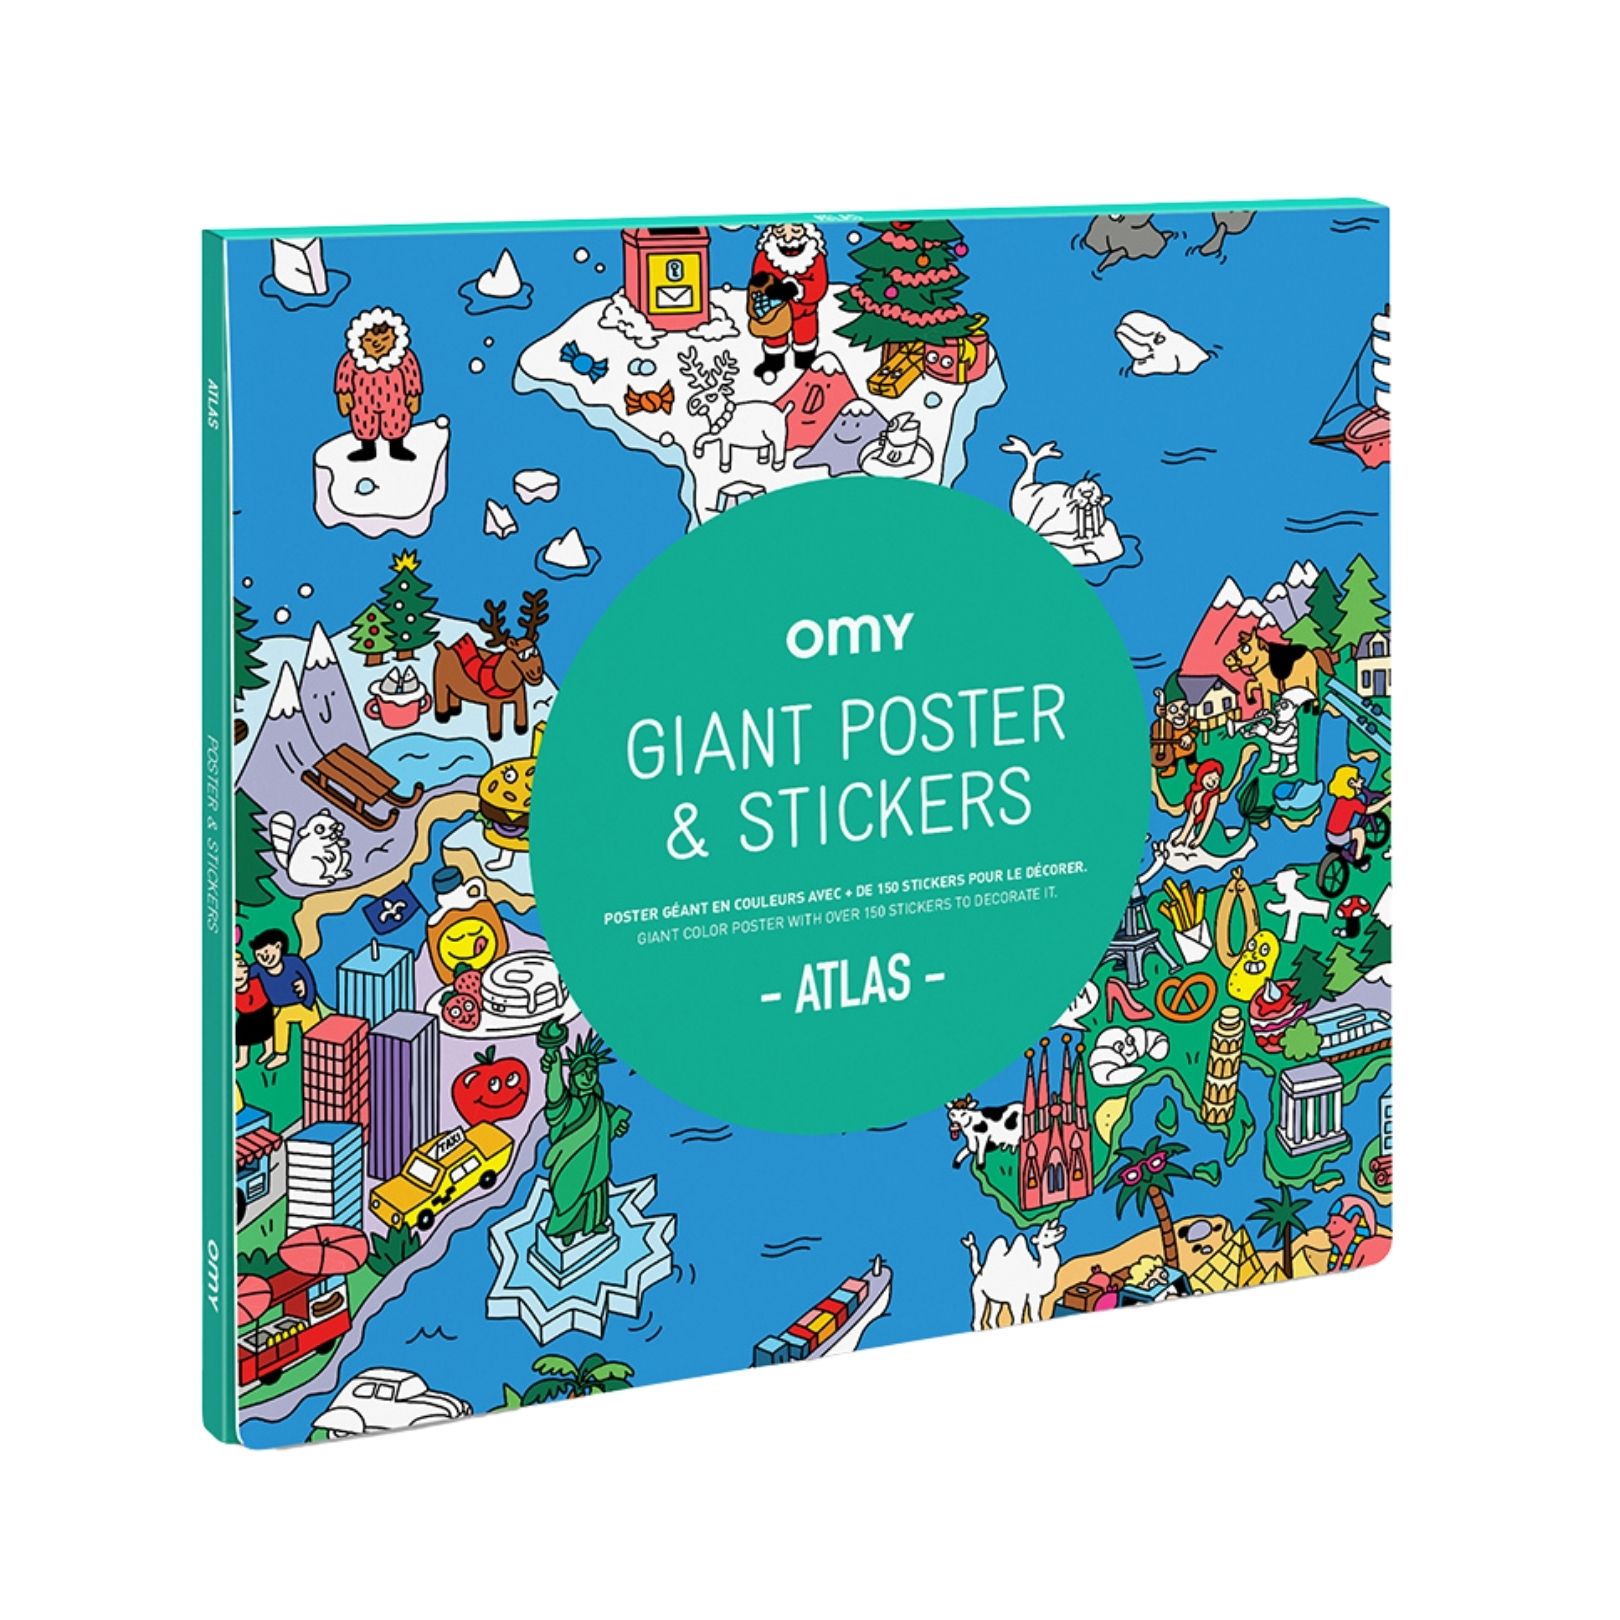 Poster géant & stickers | Atlas - Omy